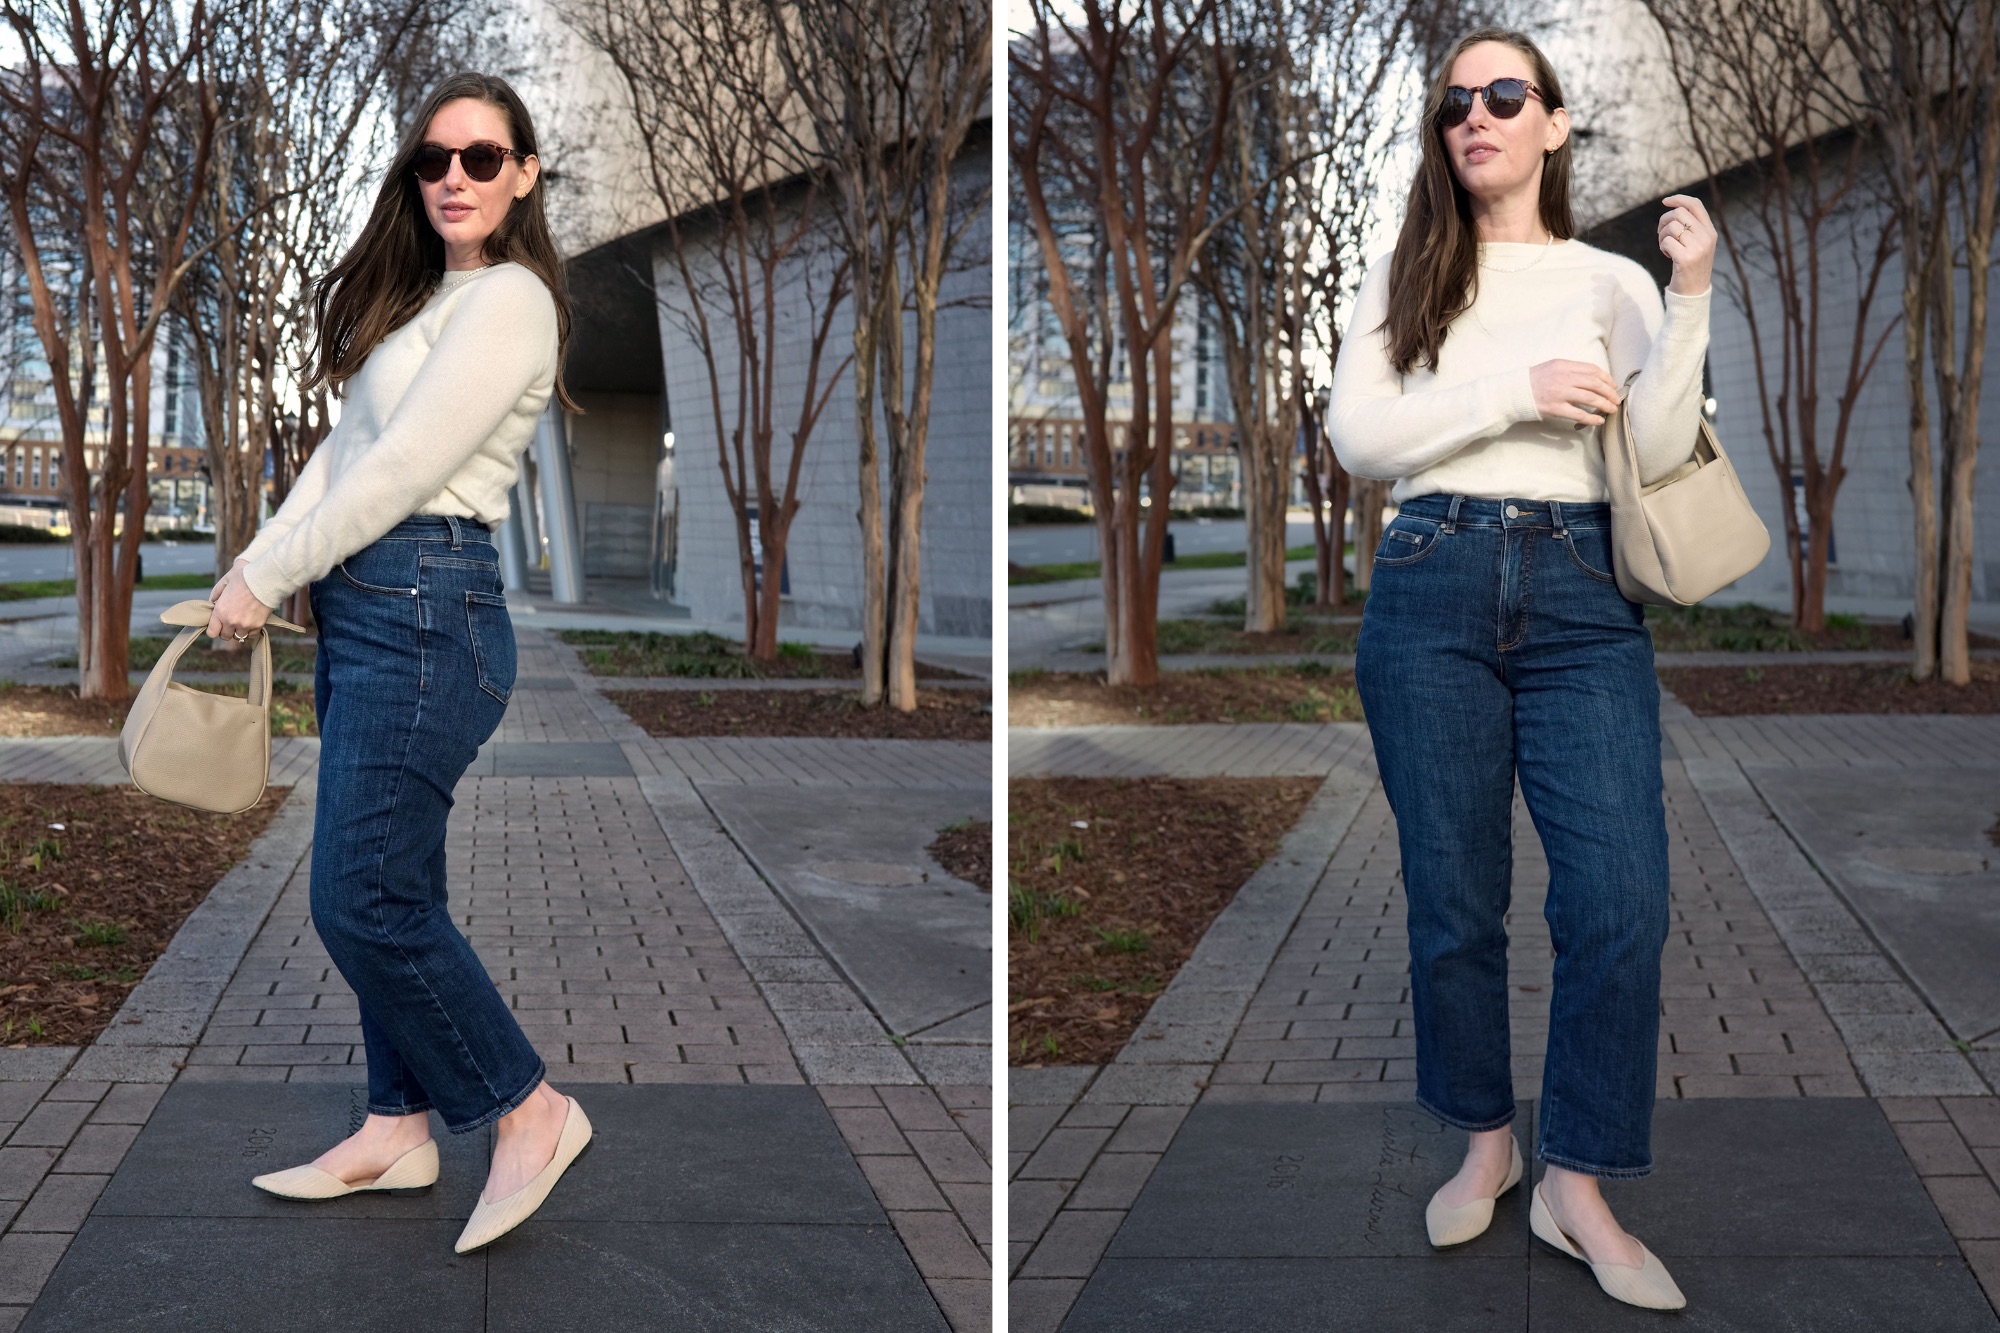 Alyssa wears the Donna High Rise Curve Jeans in blue with a cream sweater and flats in two photos